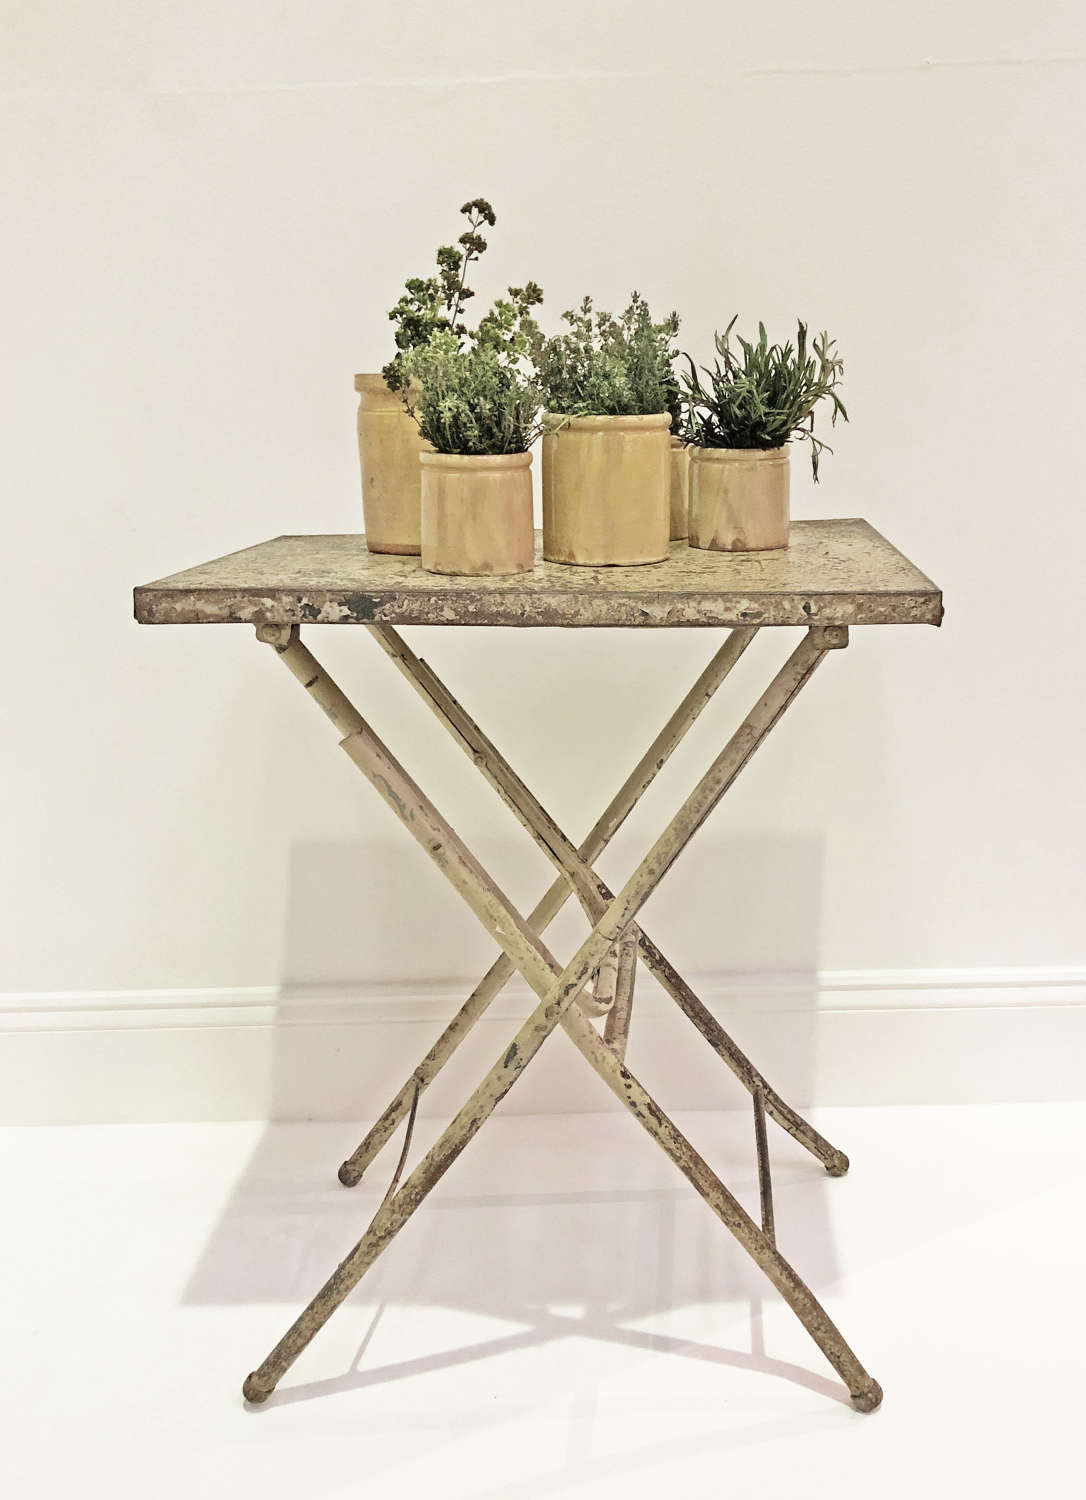 Little painted metal folding Table - circa 1940